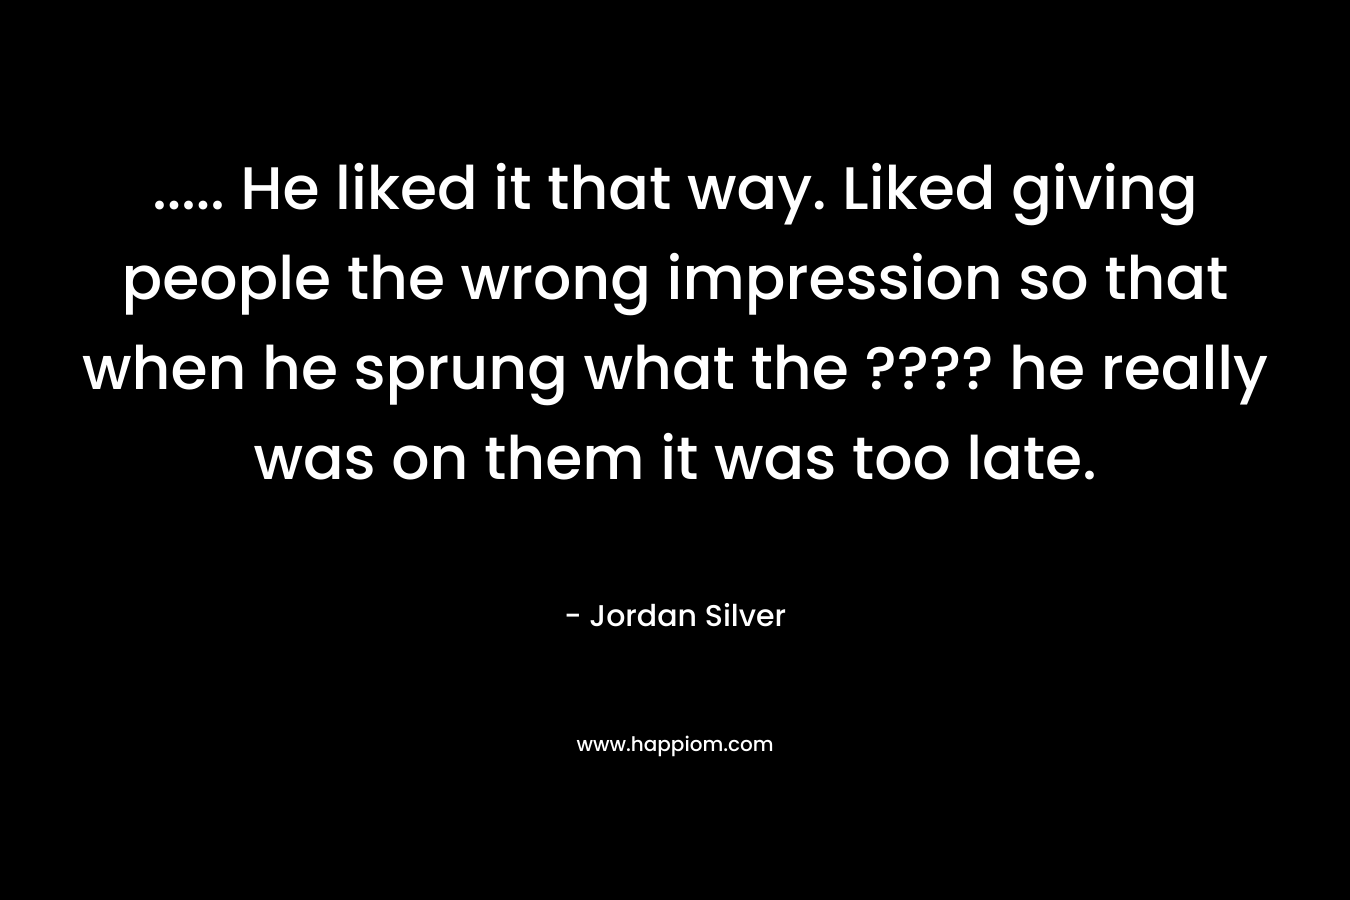 ….. He liked it that way. Liked giving people the wrong impression so that when he sprung what the ???? he really was on them it was too late. – Jordan Silver